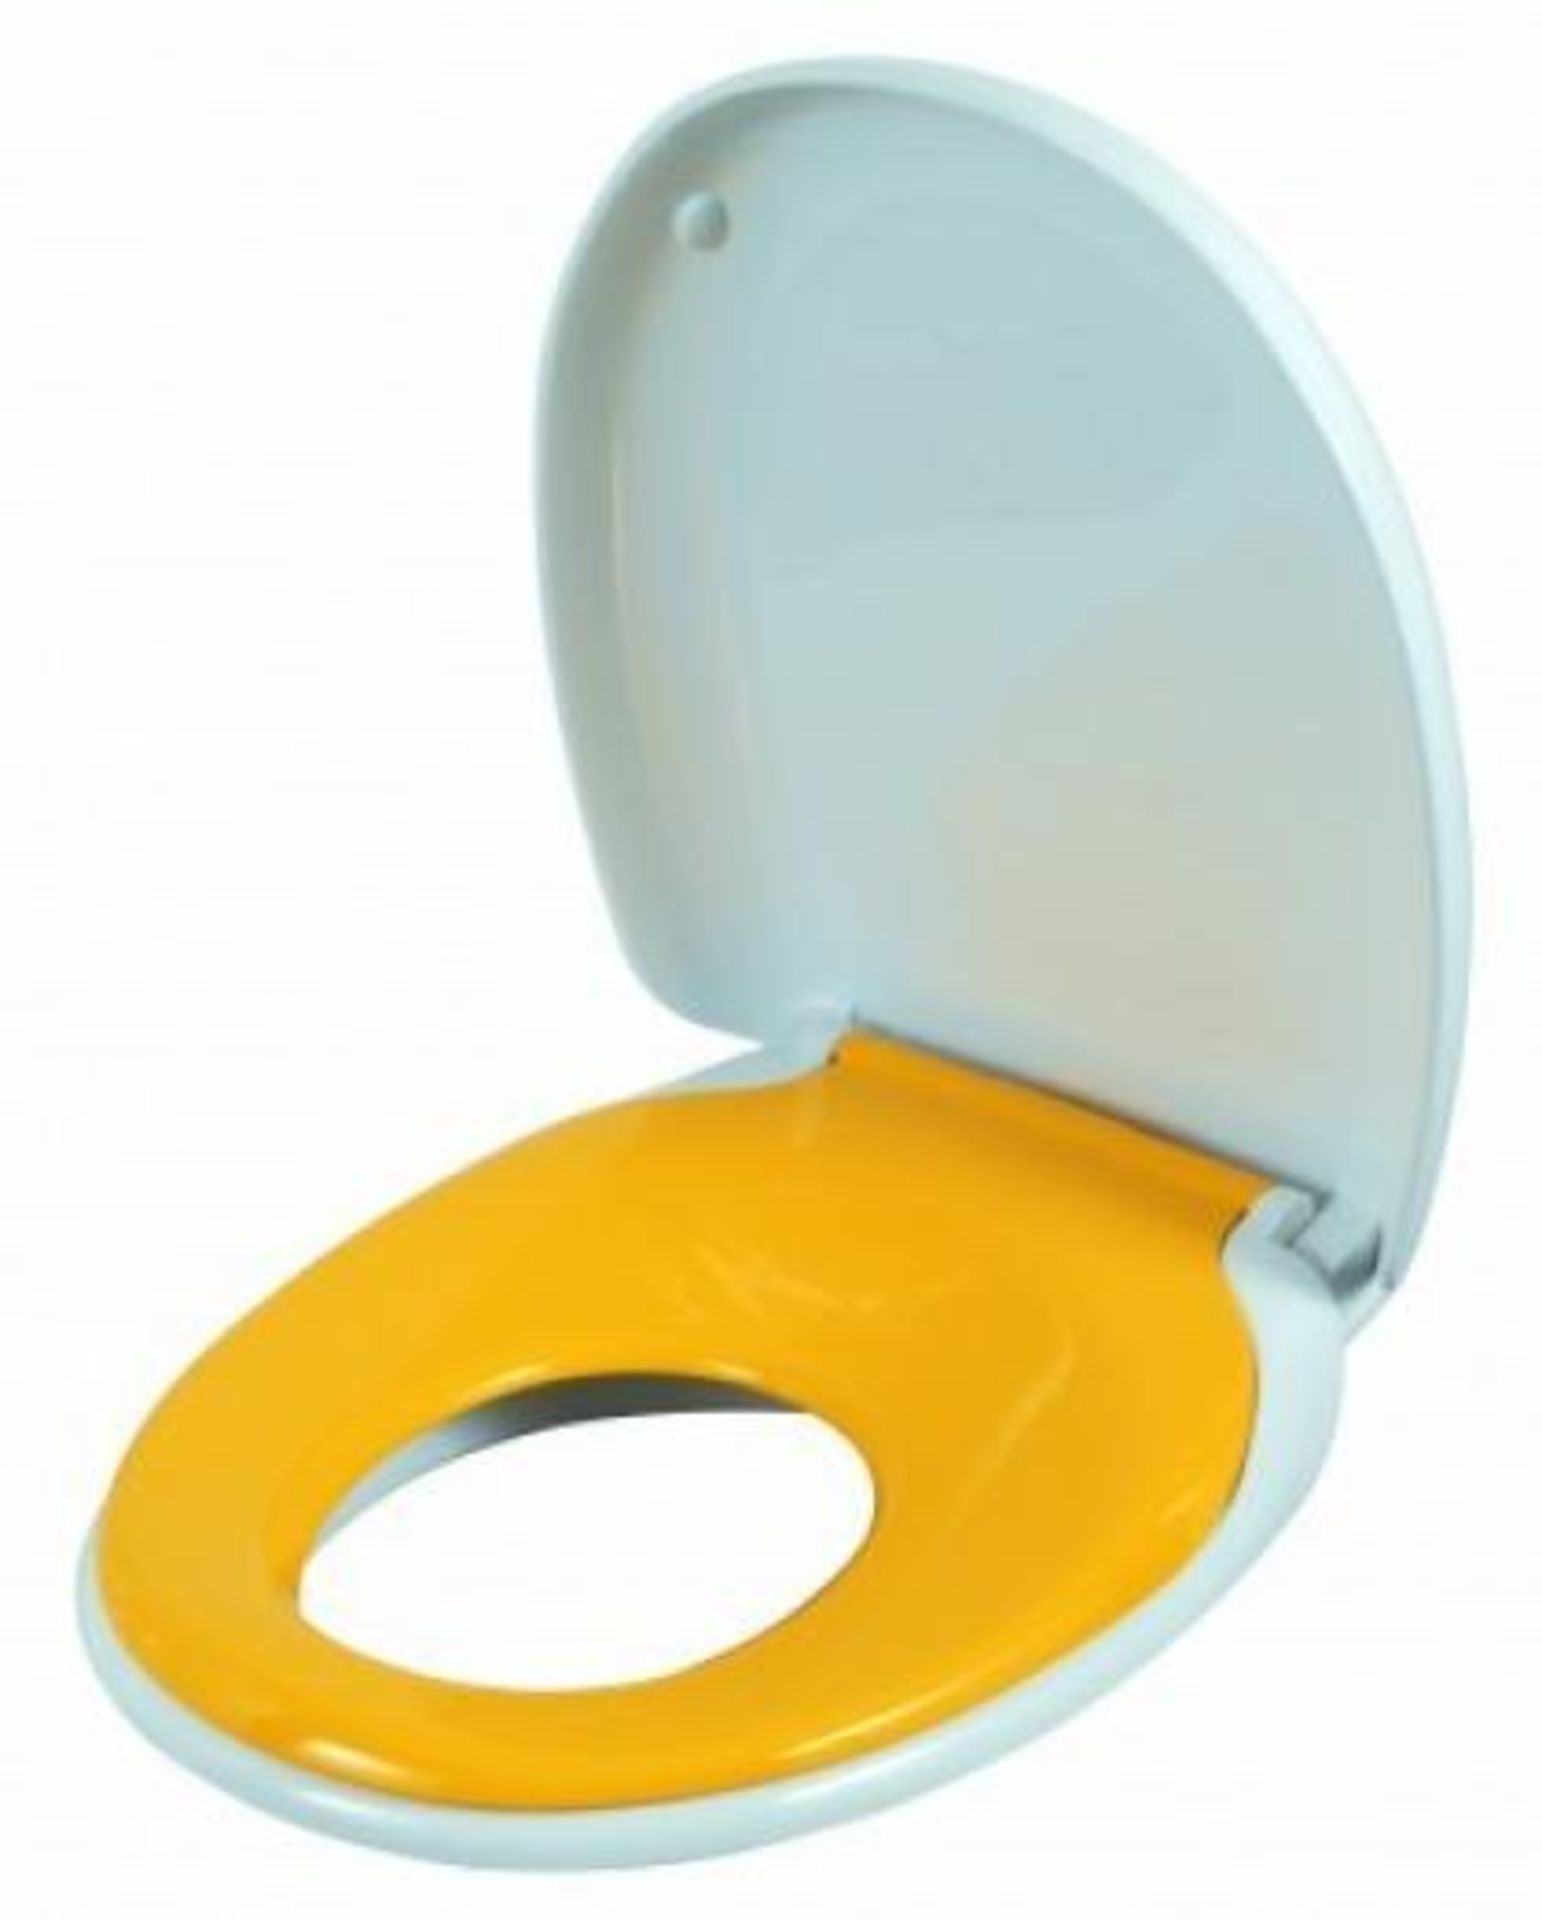 1 x Dubaloo 2 in 1 Family Training Toilet Seat - One Seat For All The Family - Full Size Toilet Seat - Image 2 of 2